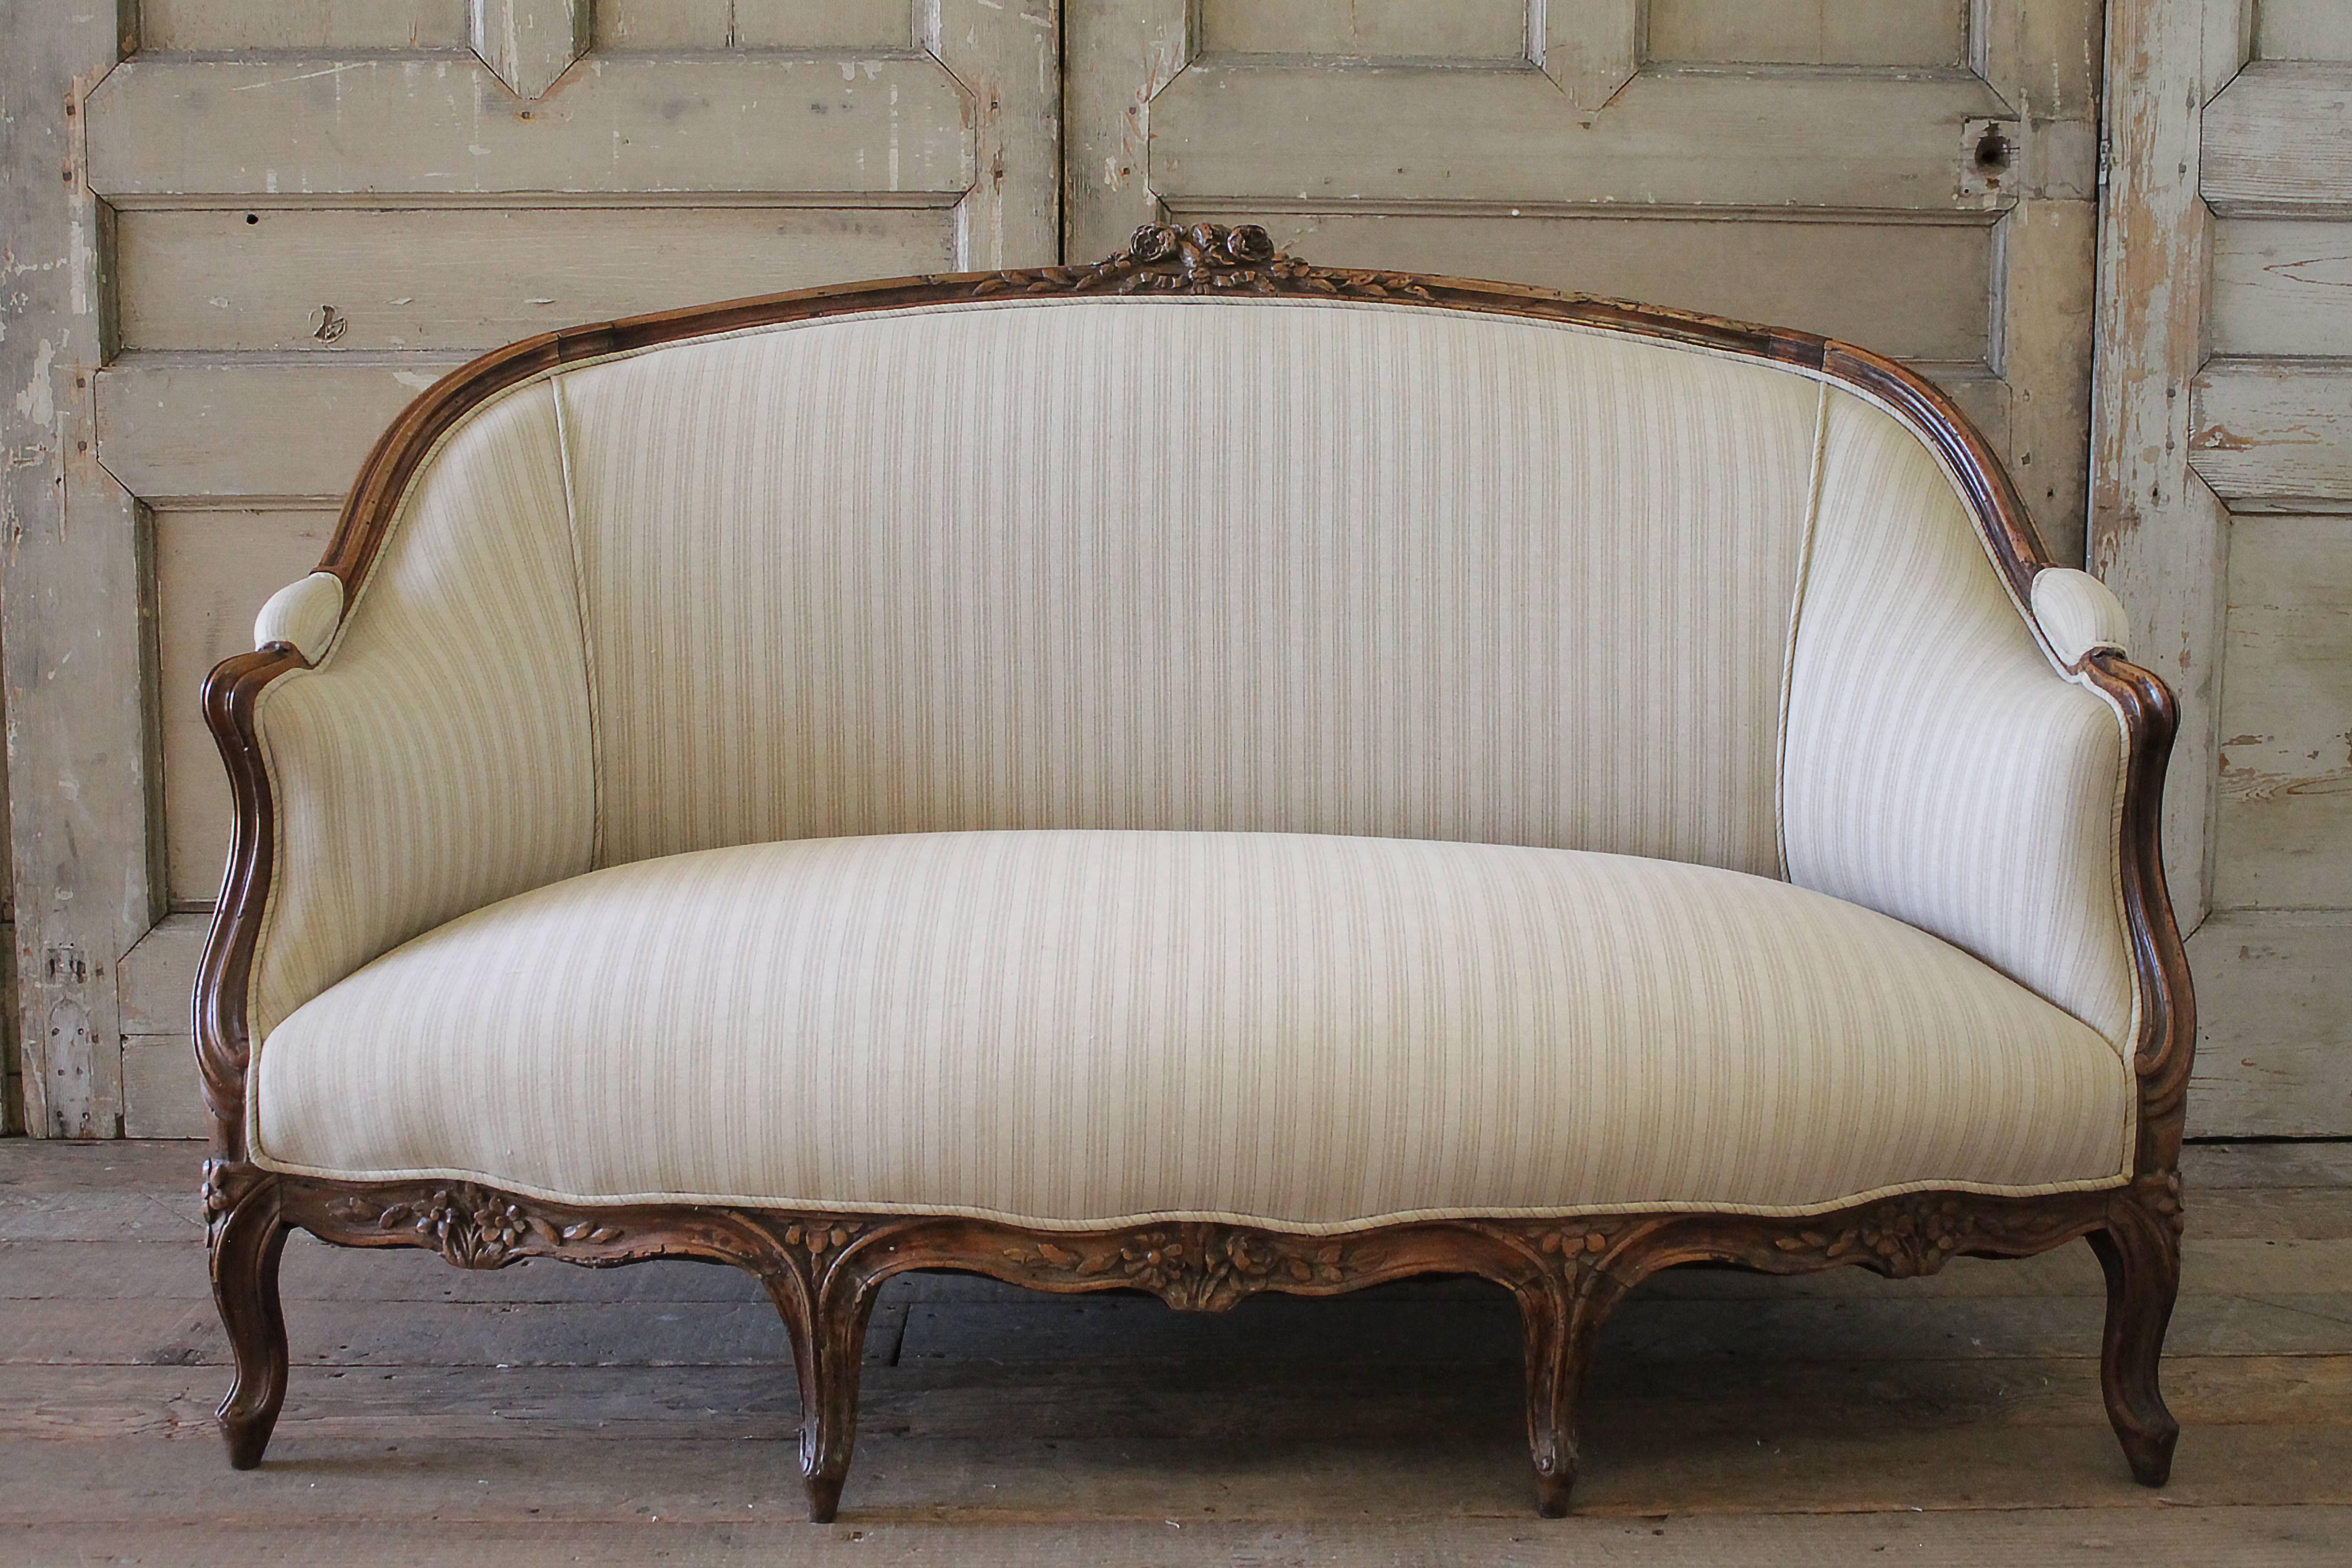 Louis XV 19th Century Walnut Rose Carved Settee Upholstered in Stripe Linen